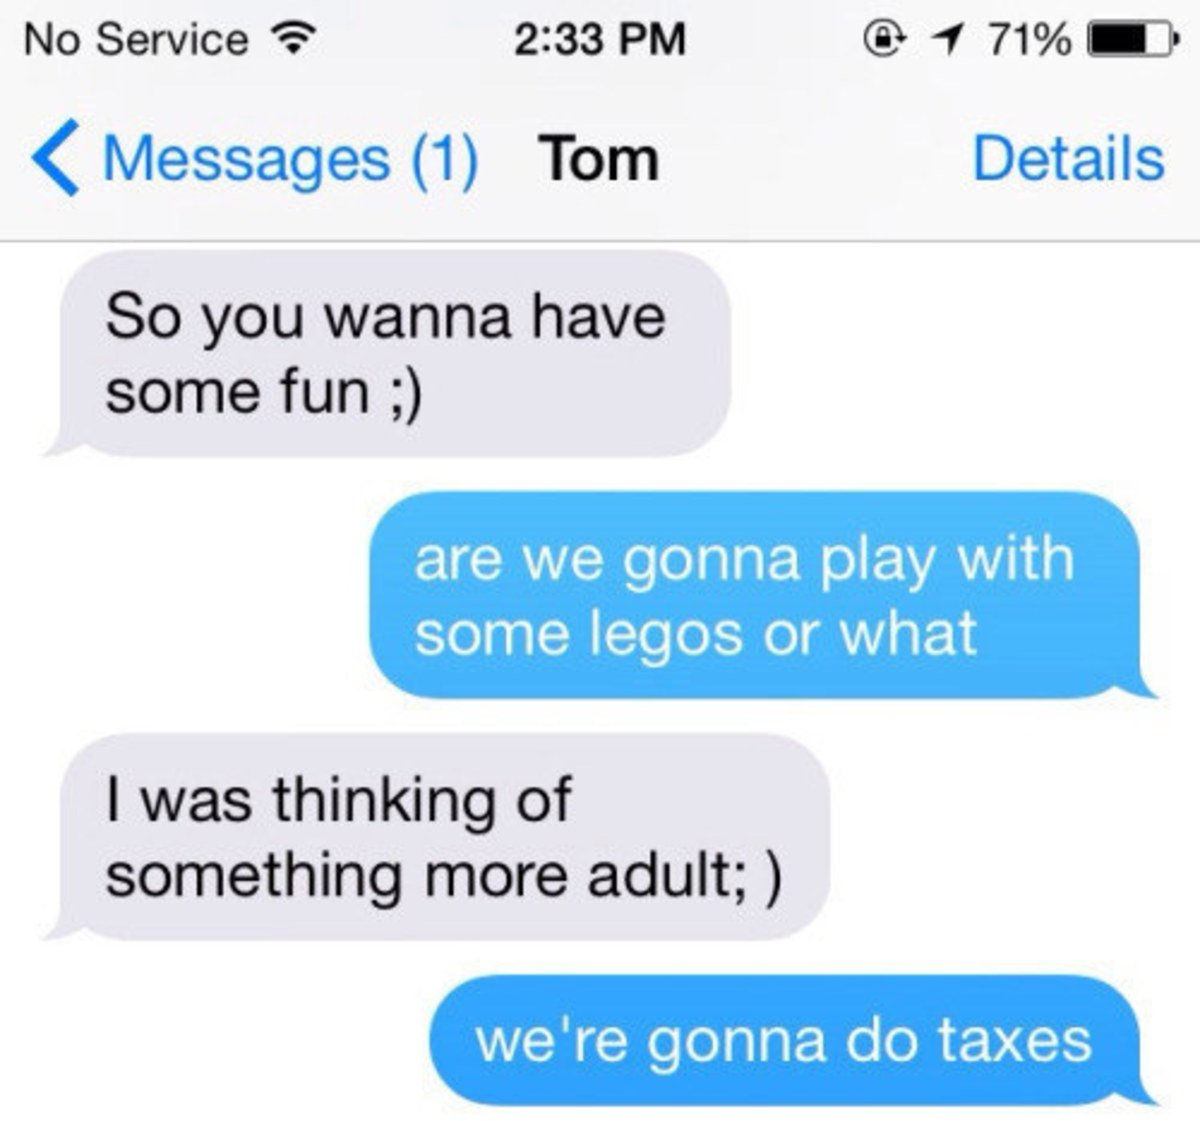 Have some fun with your text messages.